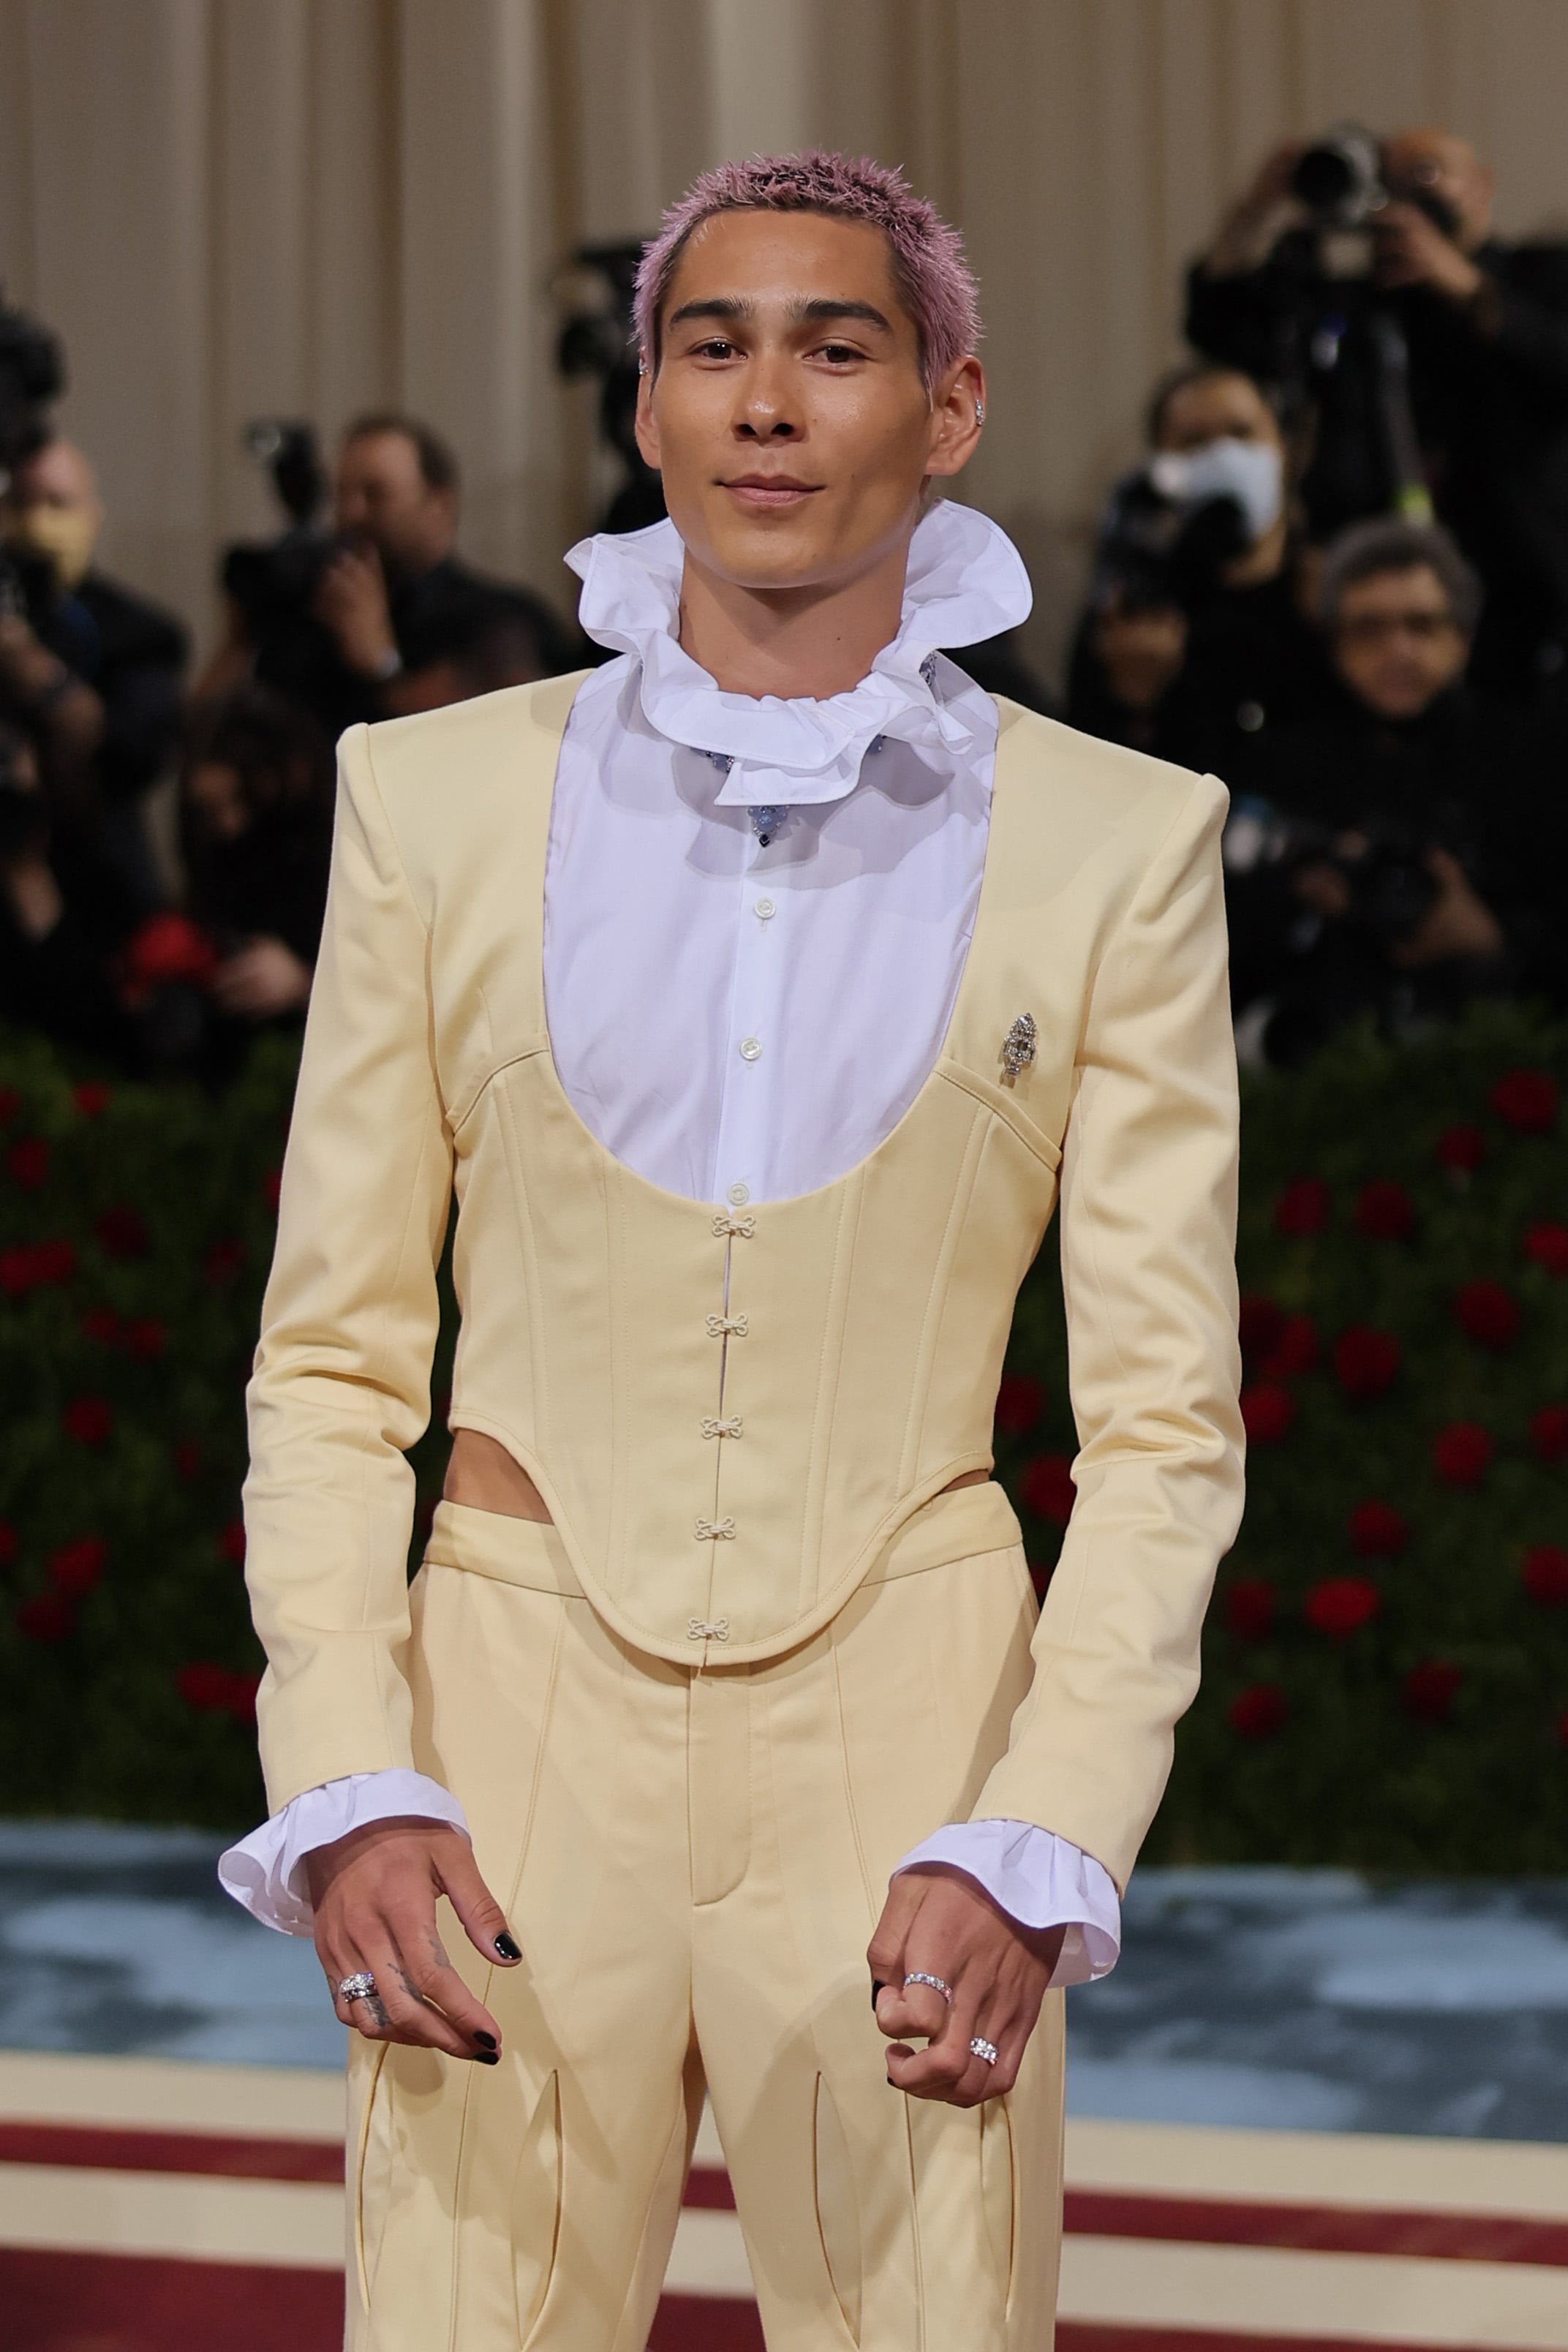 Met Gala 2021: all the menswear looks from the red carpet - GQ